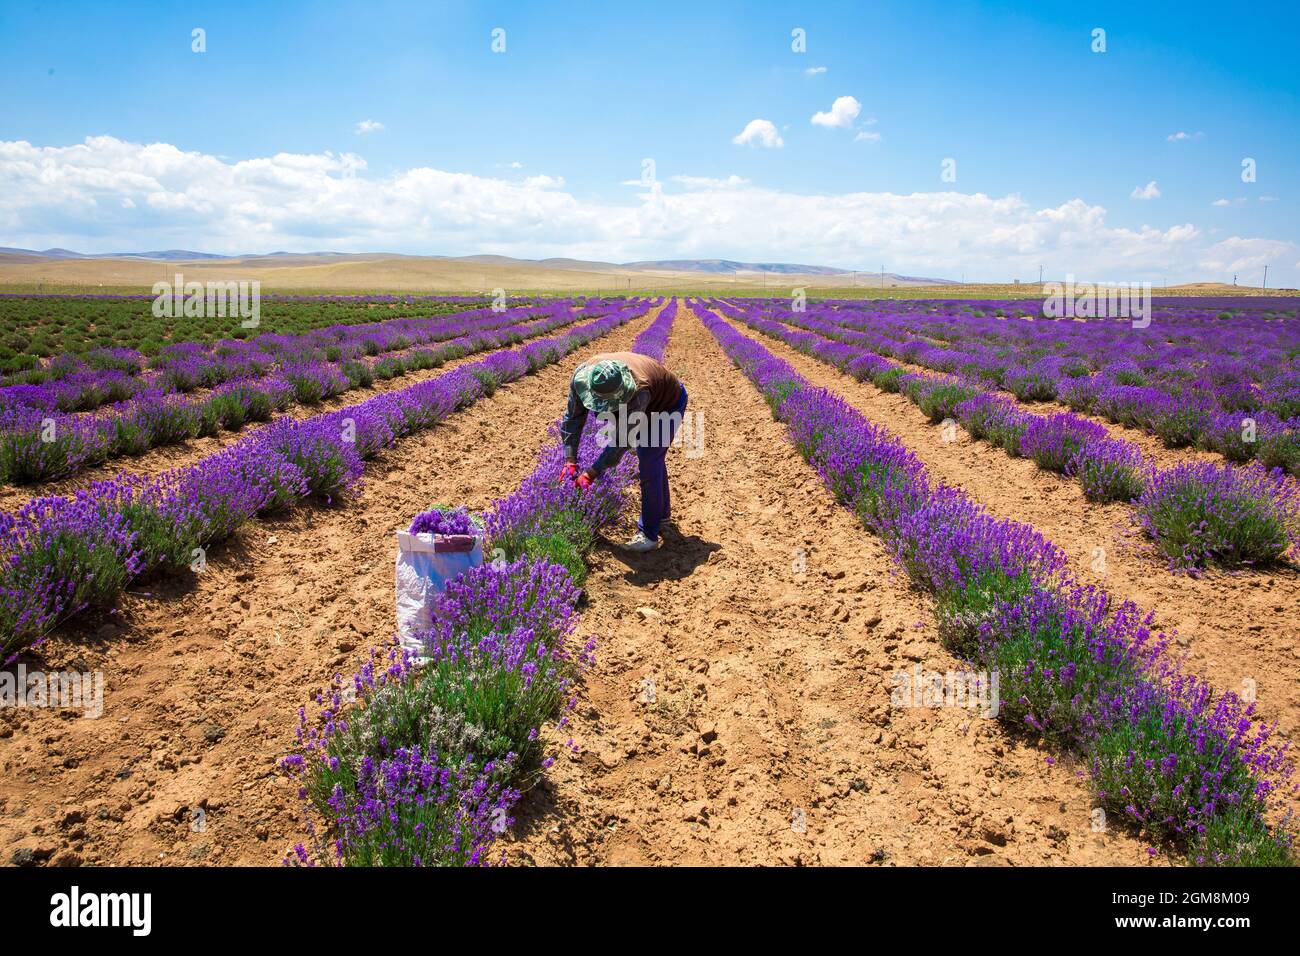 Flower Farmer or Worker in the Lavender Field during Lavender harvest, Man collects lavender by hand. Stock Photo